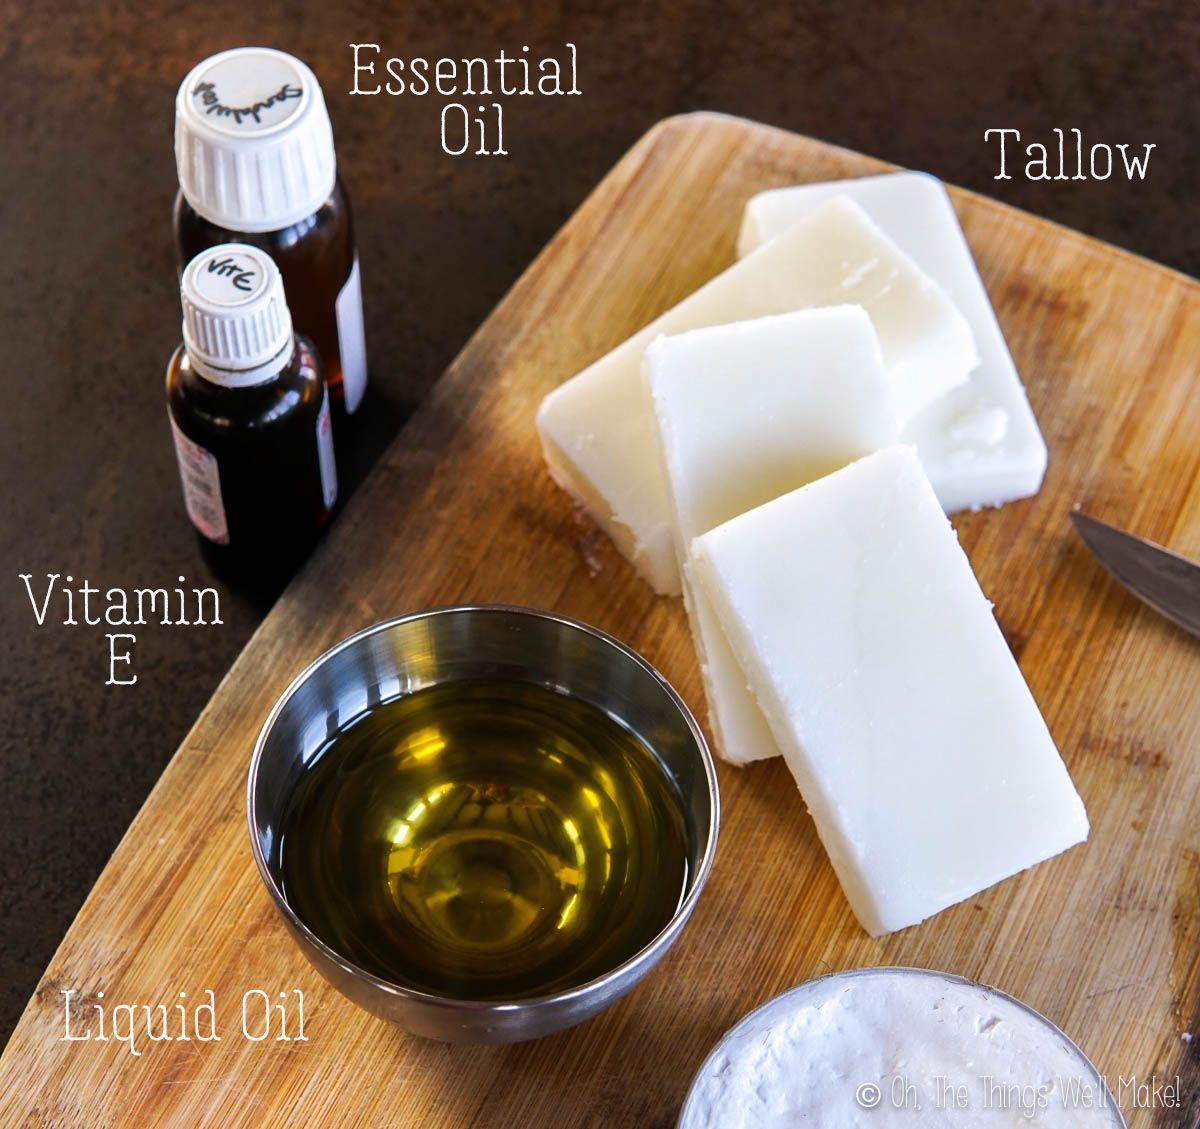 ingredients for a tallow body butter